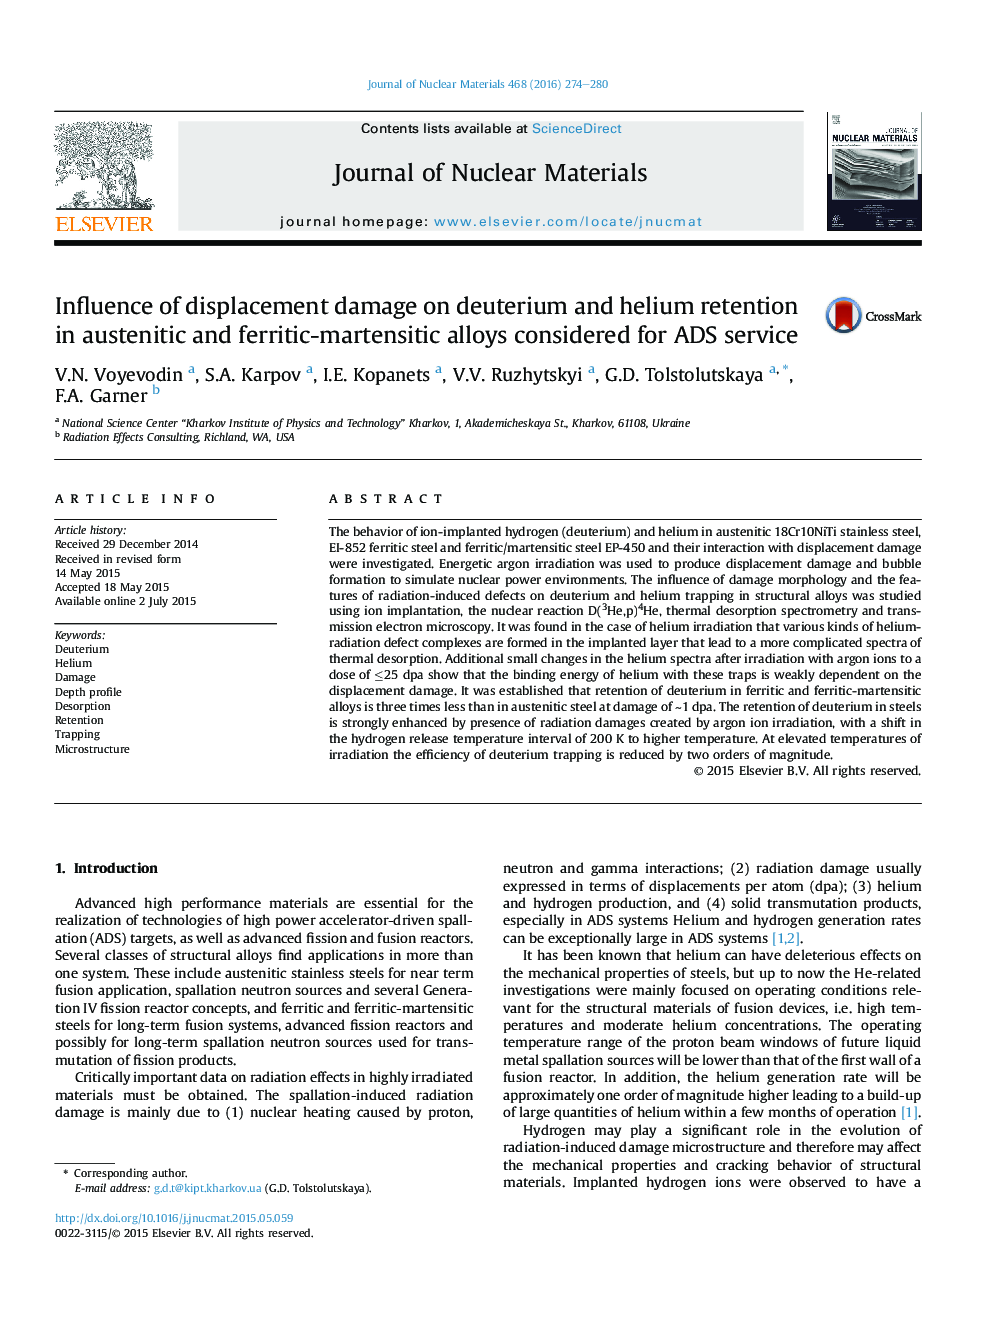 Influence of displacement damage on deuterium and helium retention in austenitic and ferritic-martensitic alloys considered for ADS service